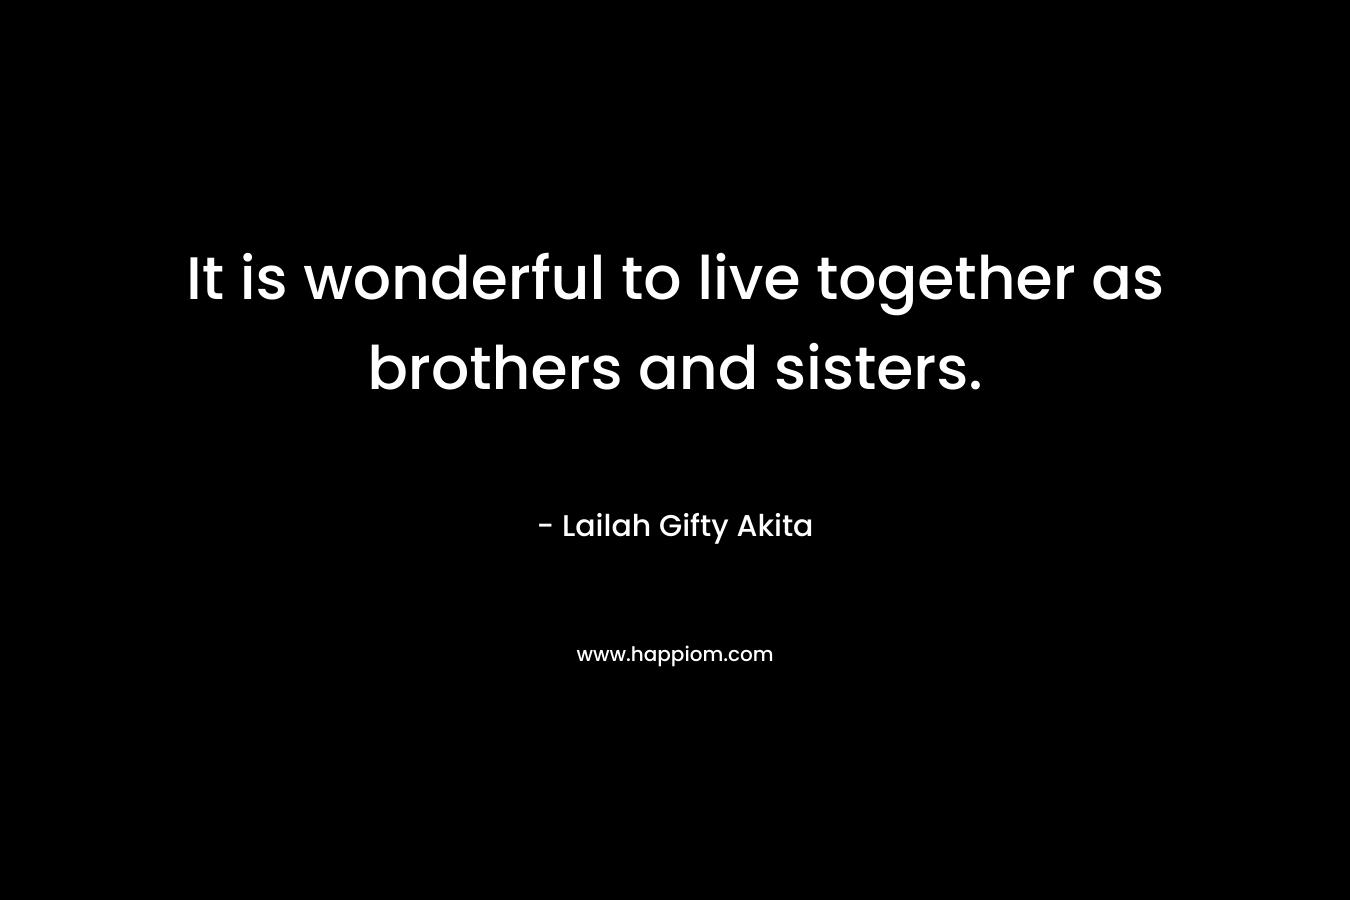 It is wonderful to live together as brothers and sisters.